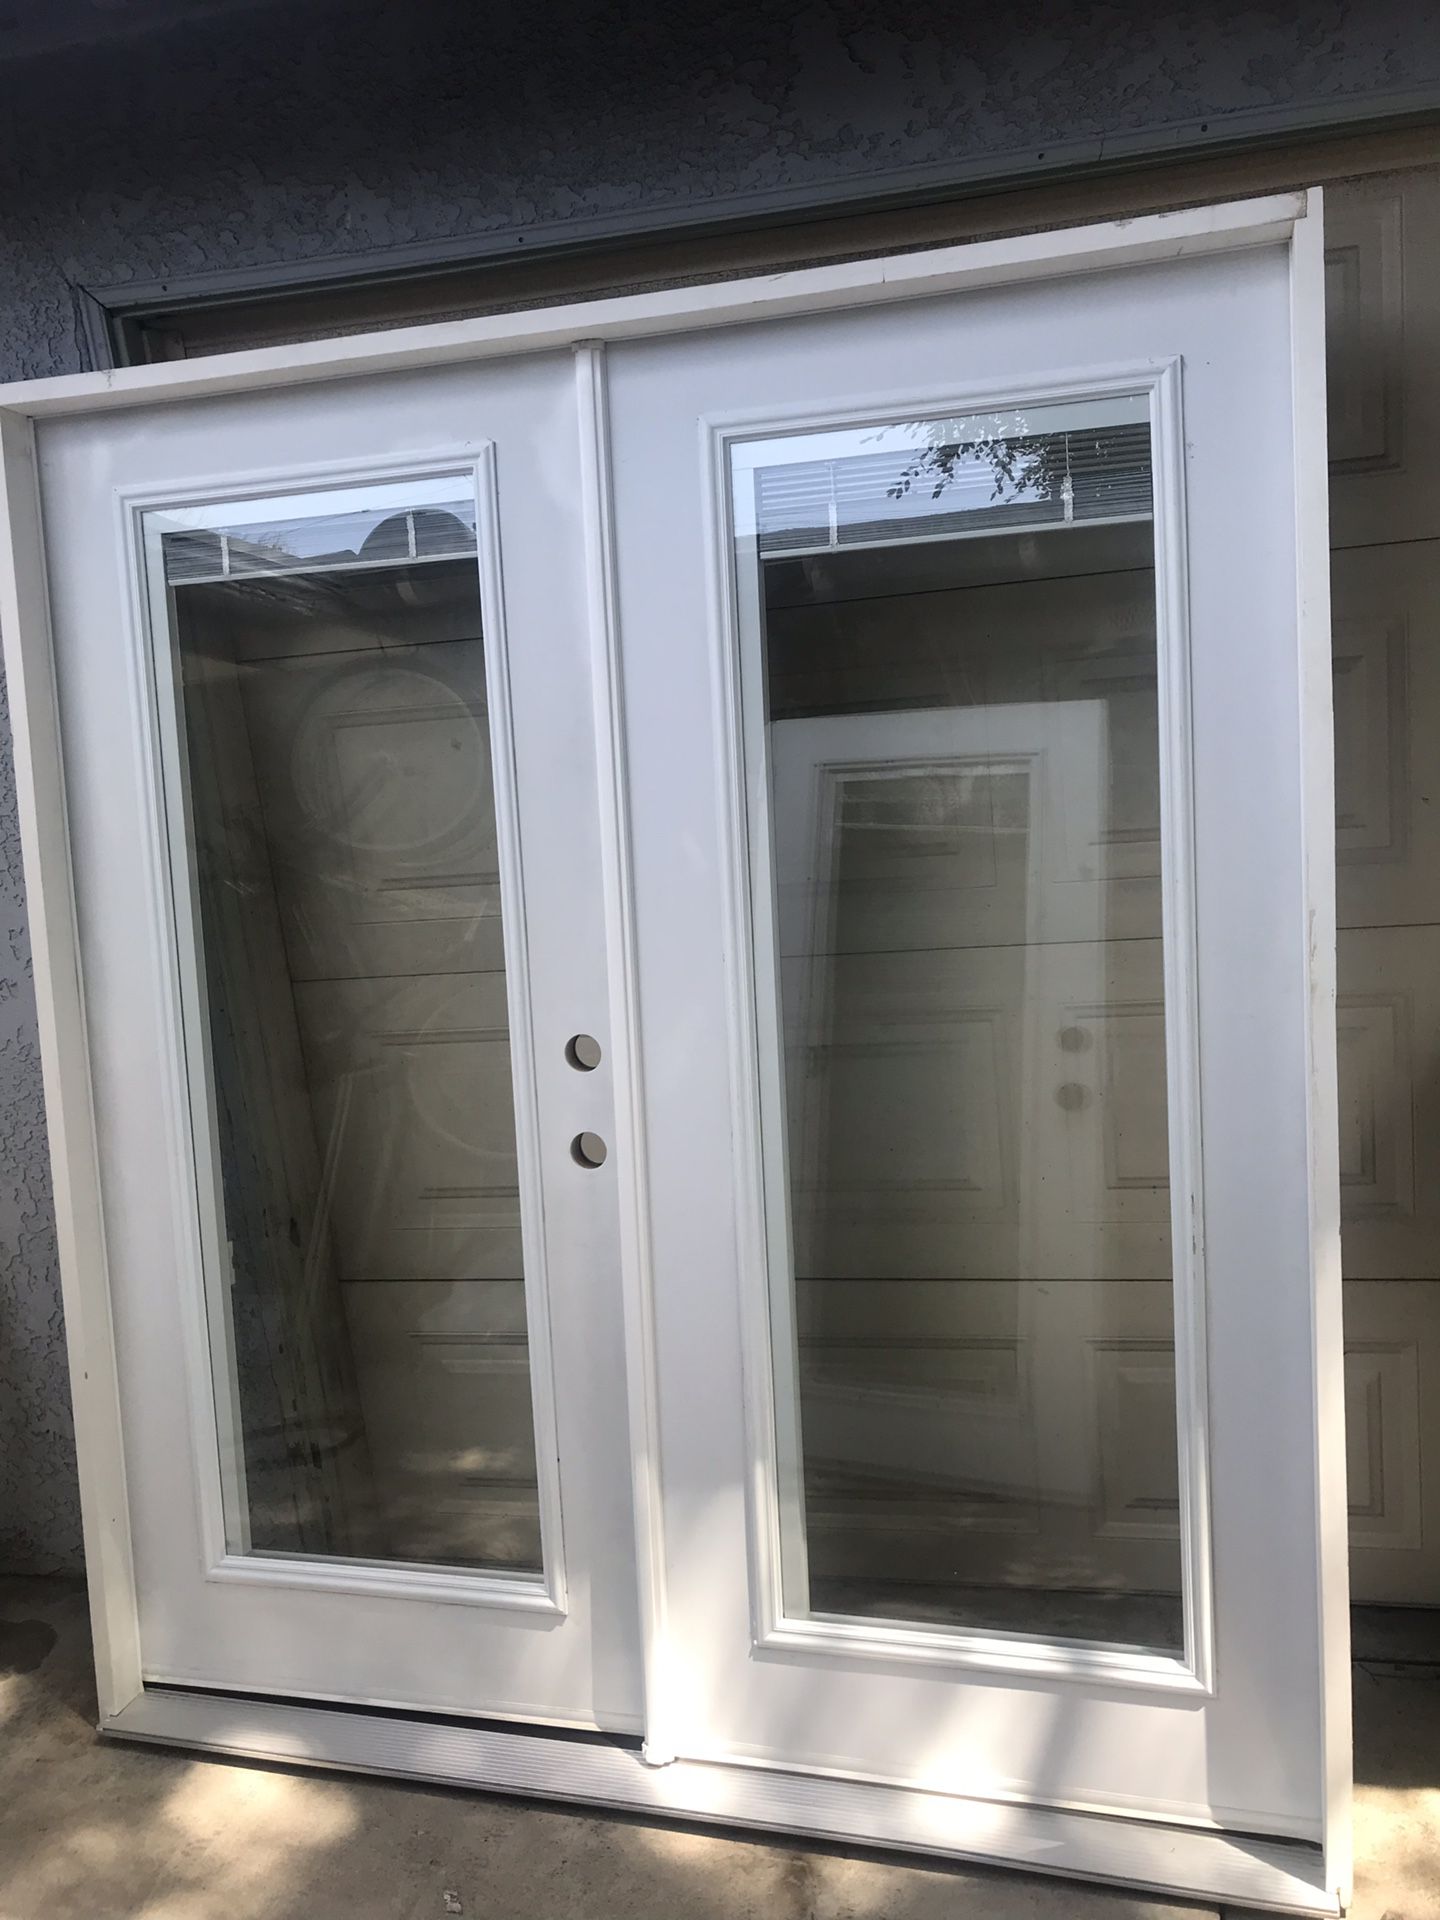 New patio French doors w / blinds or without